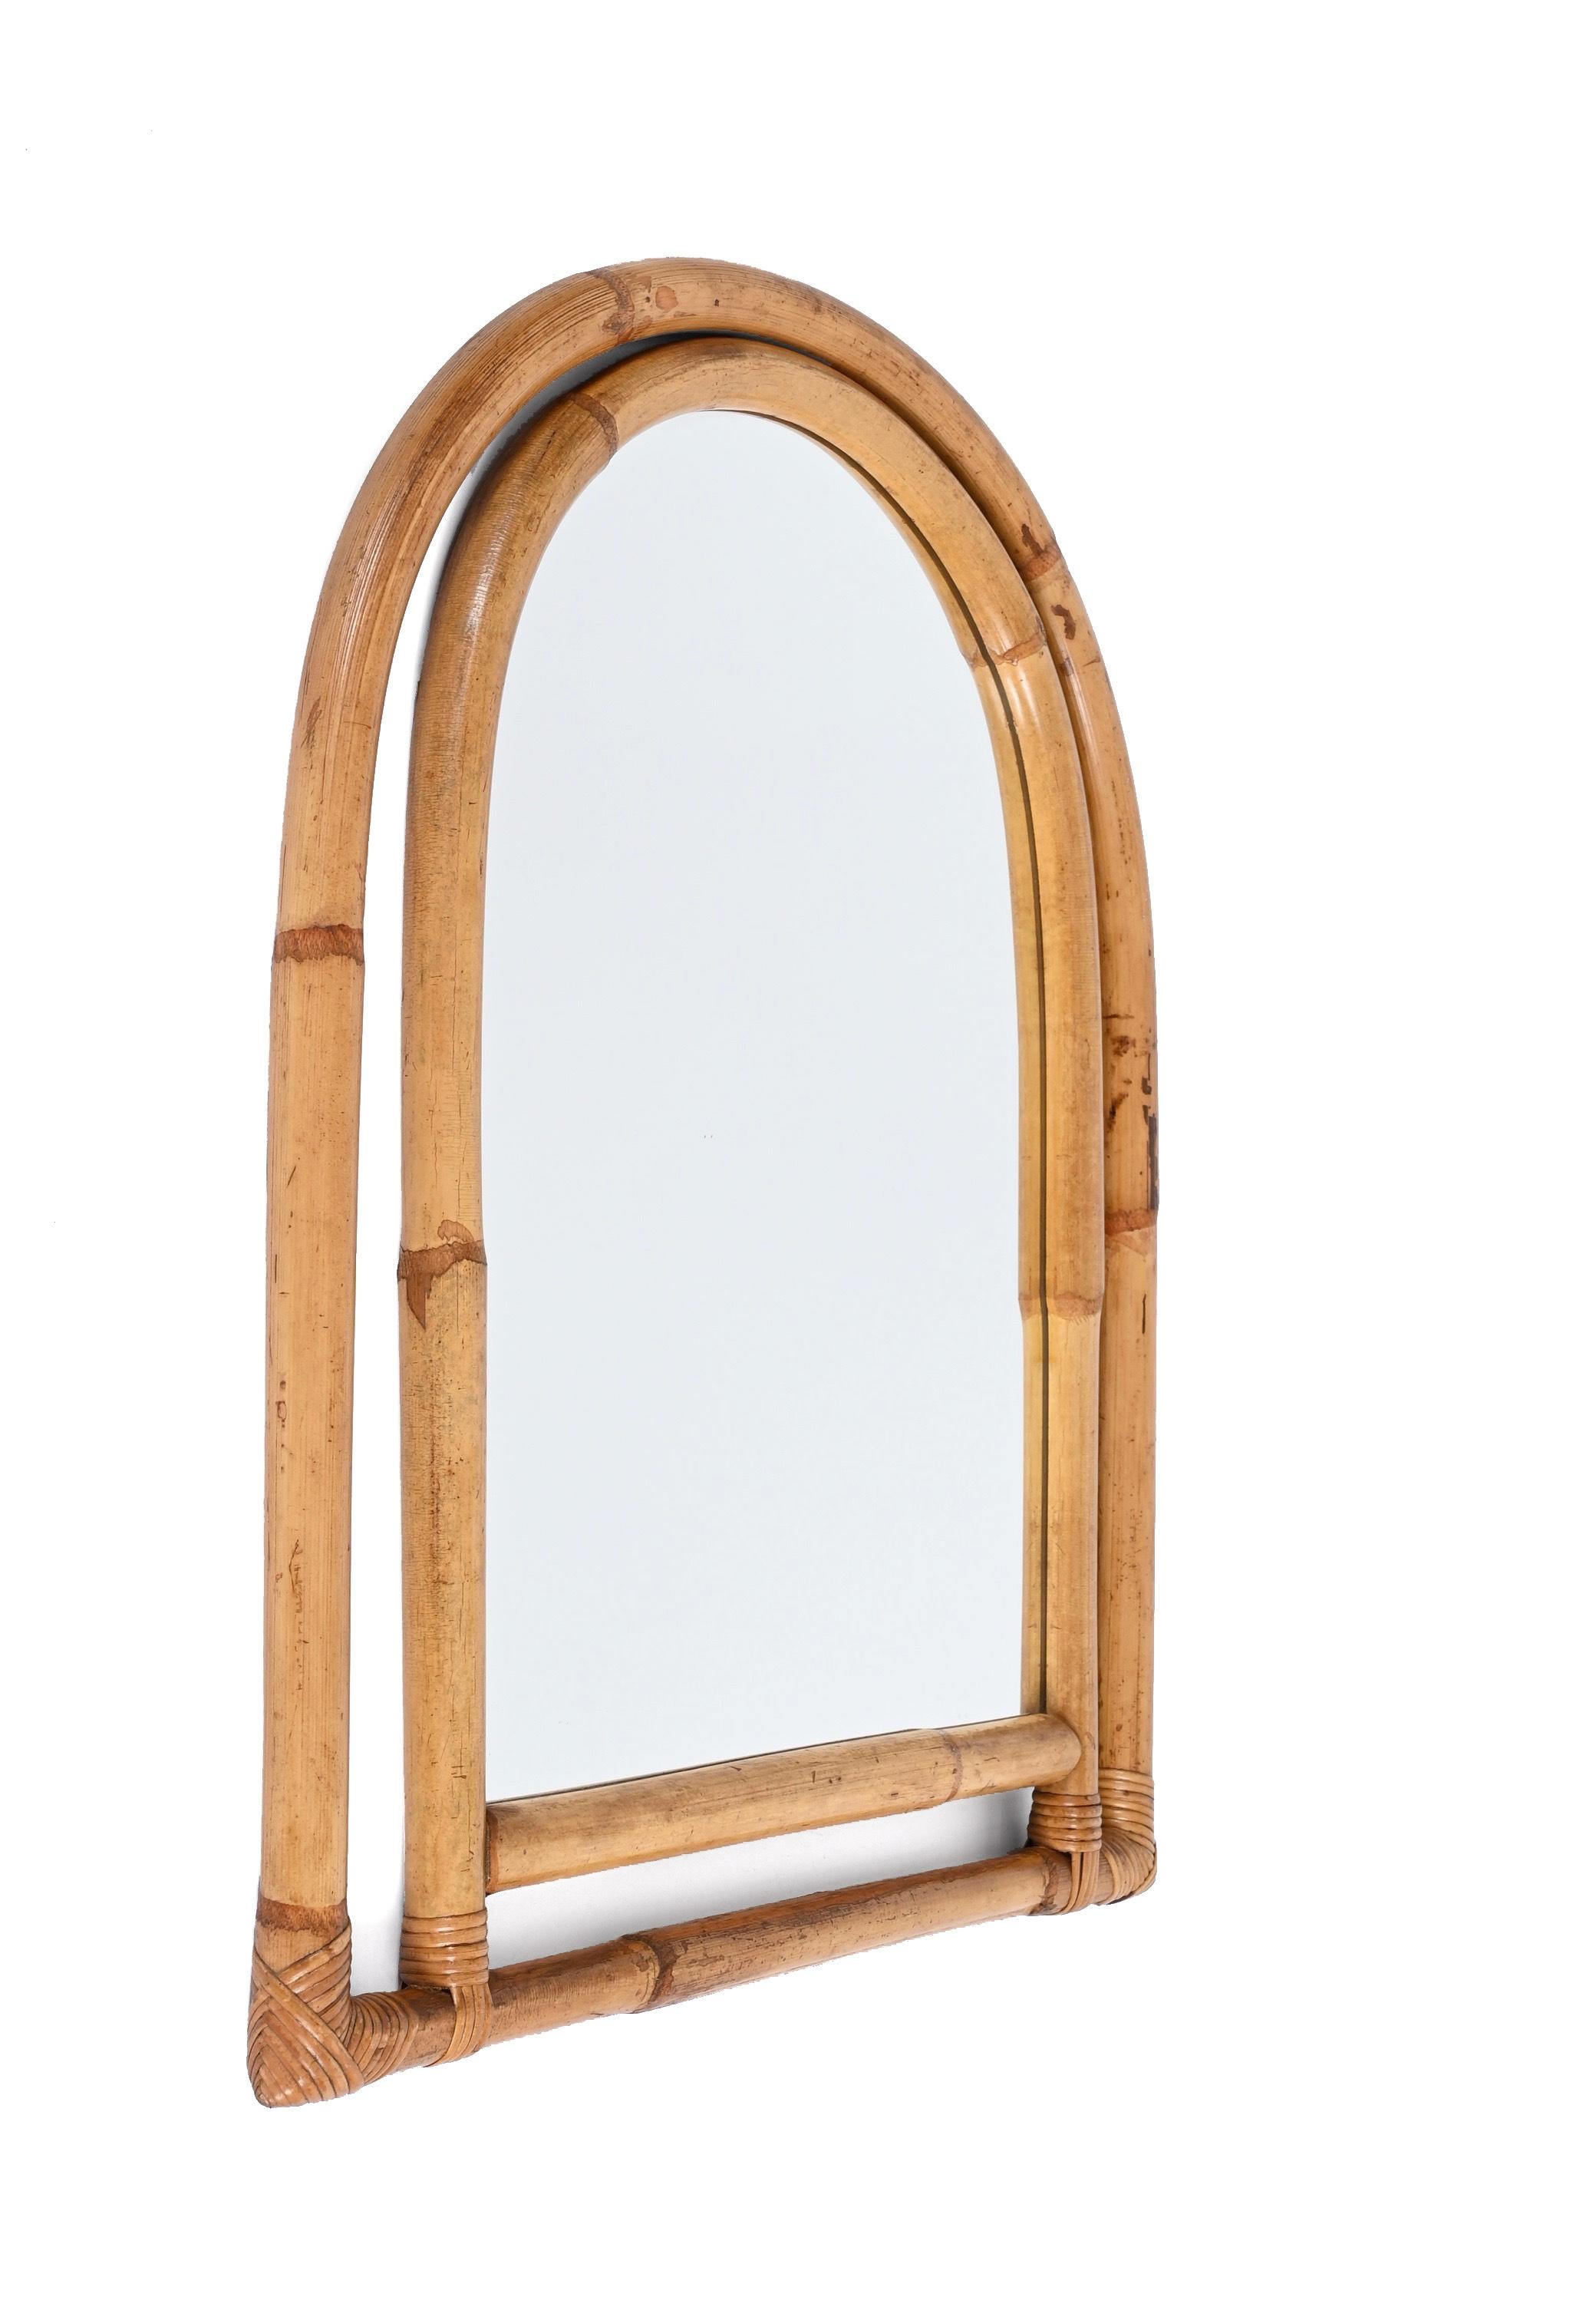 Midcentury arched mirror with a stunning double frame in curved bamboo and rattan wicker. This fantastic item was produced in Italy in the 1970s.

The way the two-round bamboo lines and the glass integrate via the sinusoidal wicker is superb and